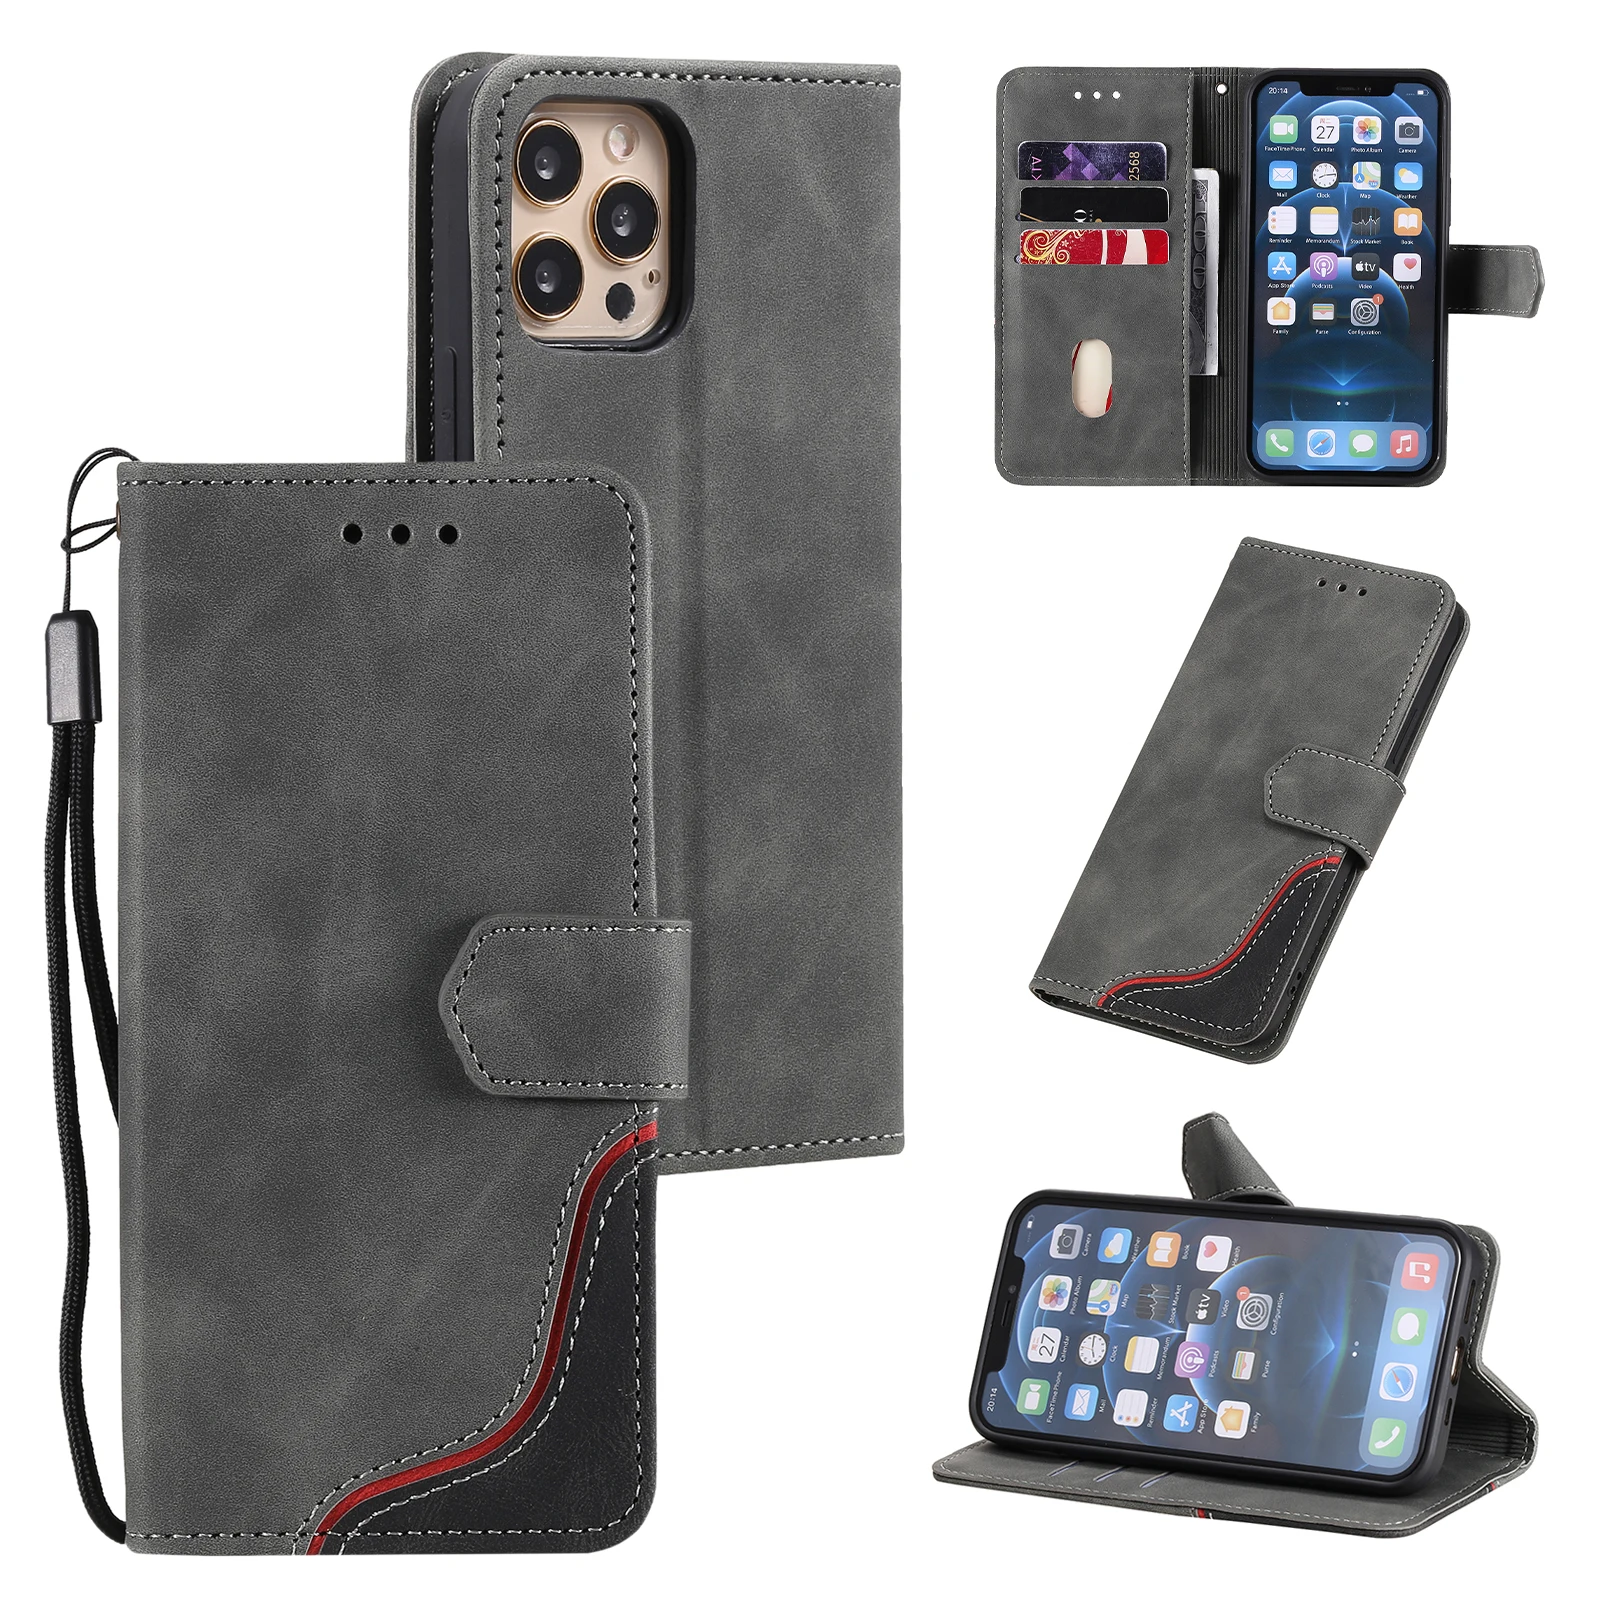 

Leather Case For Nokia 1.4 2.4 3.4 5.3 N100 G10 G20 C20 X10 X20 Wallet Flip Cover Magnet Colorblock Phone Bag